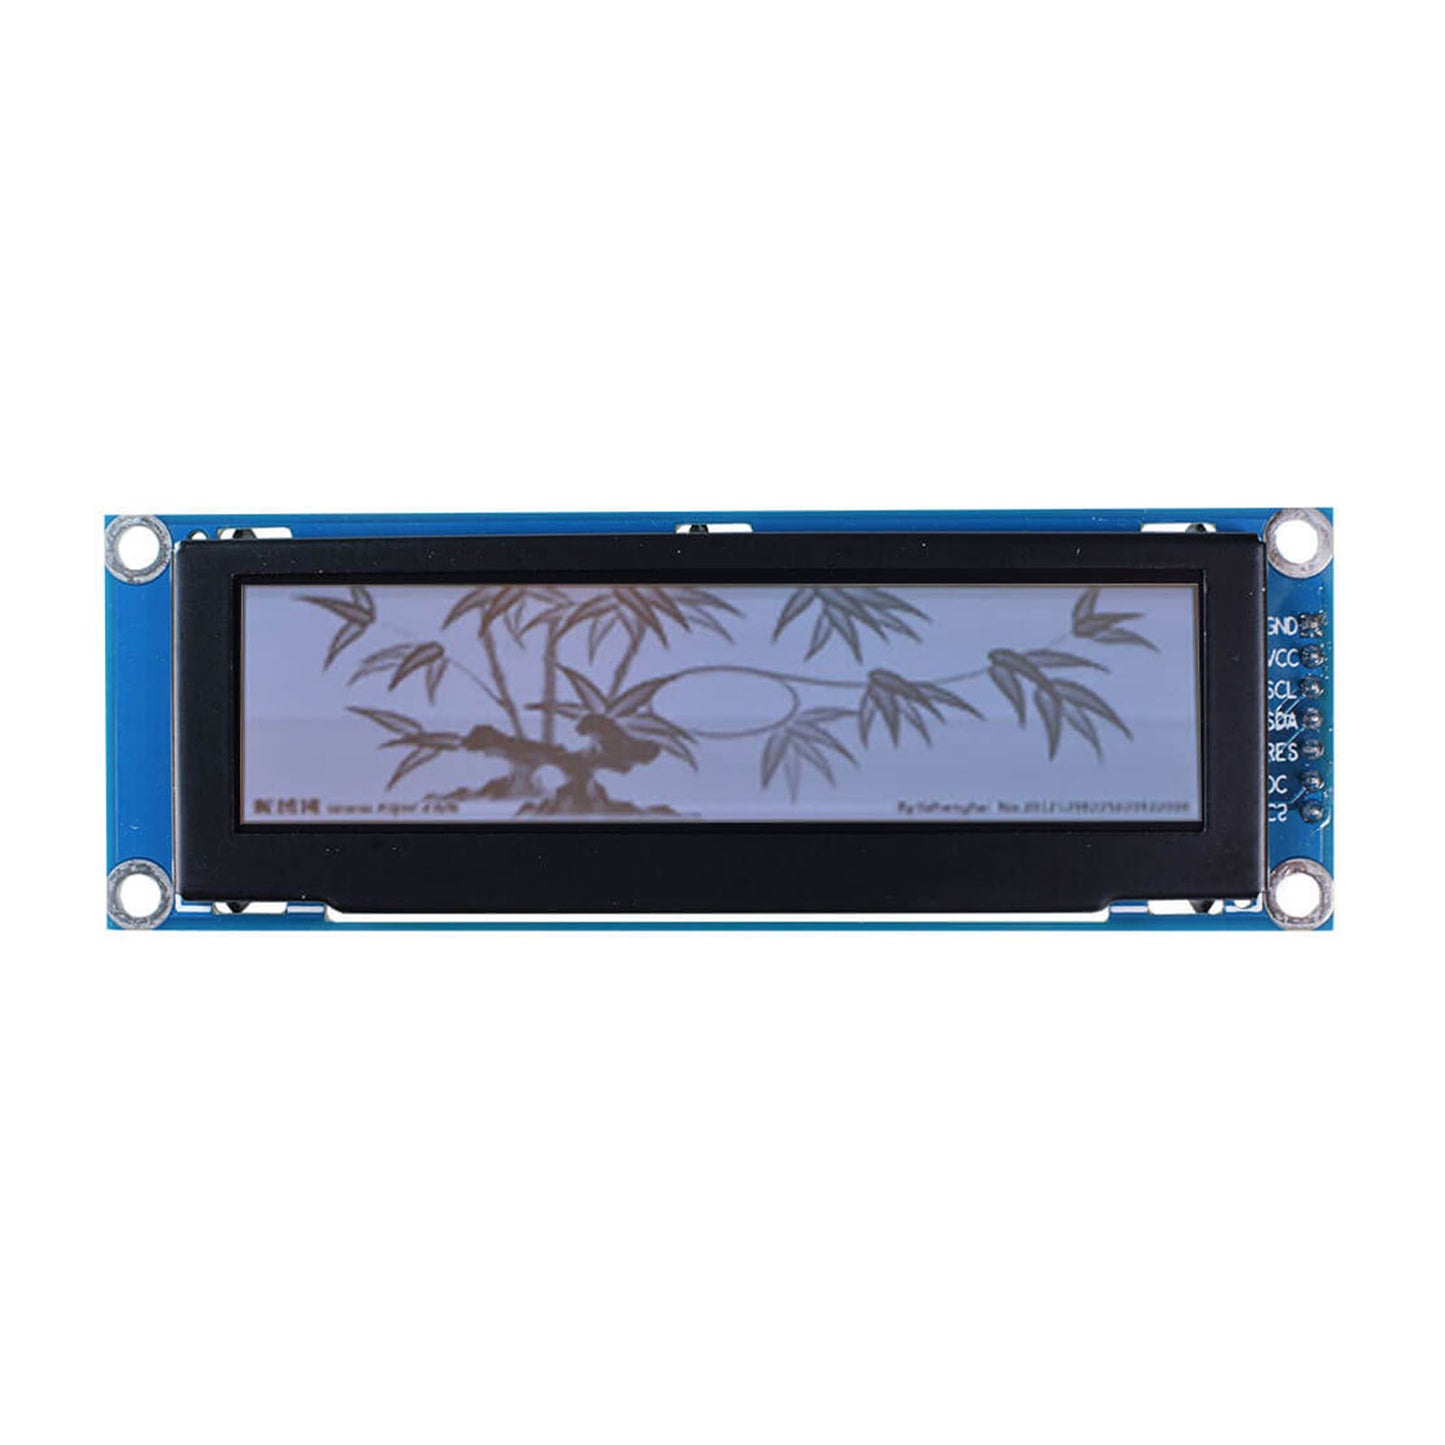 Monochrome gray OLED display module showing a Chinese-style bamboo painting